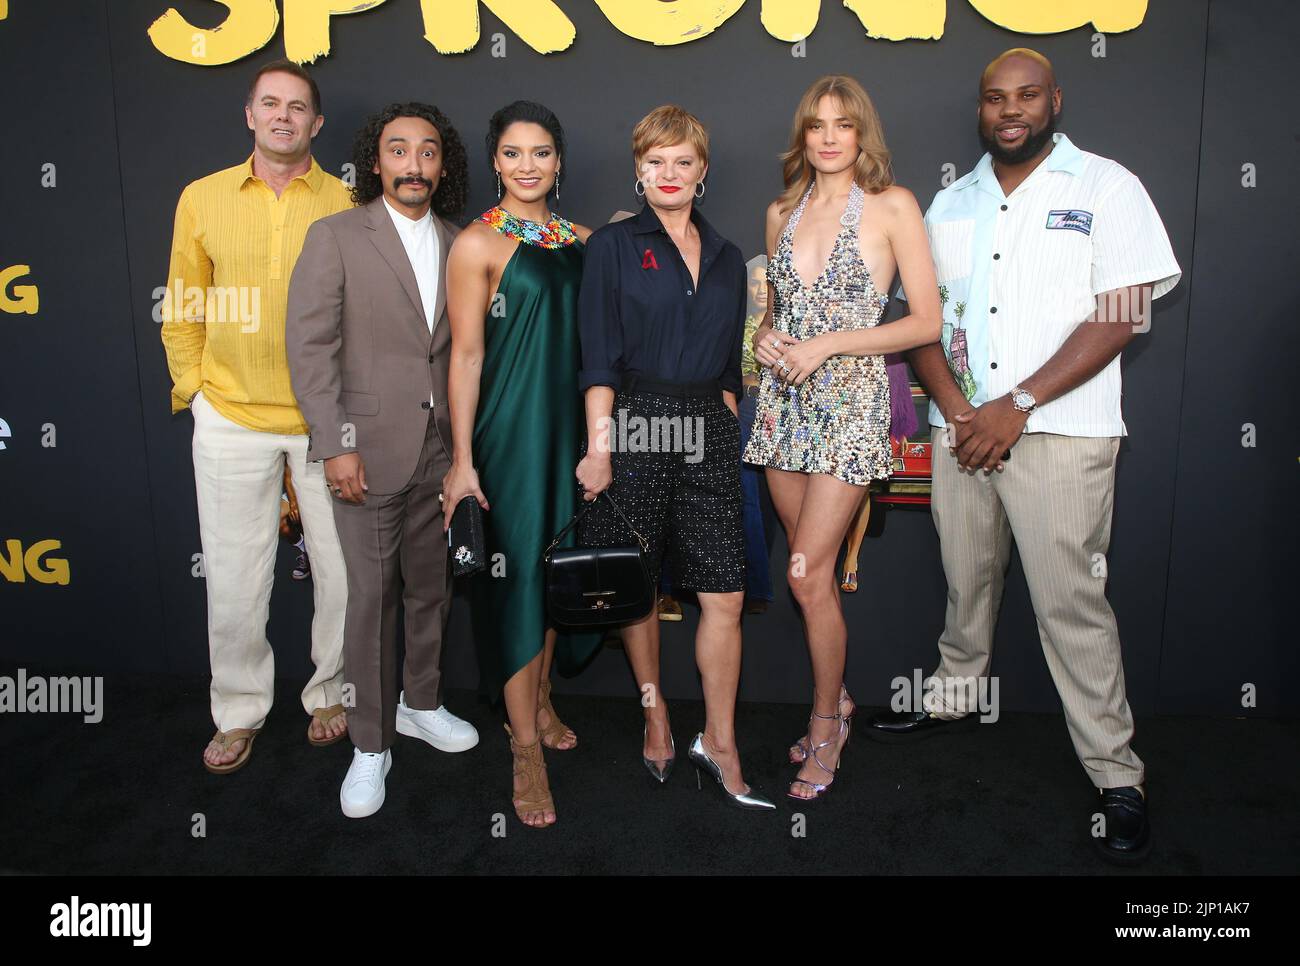 Los Angeles, California, USA. 14th Aug, 2022. Garret Dillahunt, Martha Plimpton, Phillip Garcia, Shakira Barrera, Clare Gillies, James Earl, Ever Carradine. Red Carpet Premiere Of Freevee's 'Sprung' held at the Hollywood Forever Cemetery in Los Angeles. Credit: AdMedia Photo via/Newscom/Alamy Live News Stock Photo